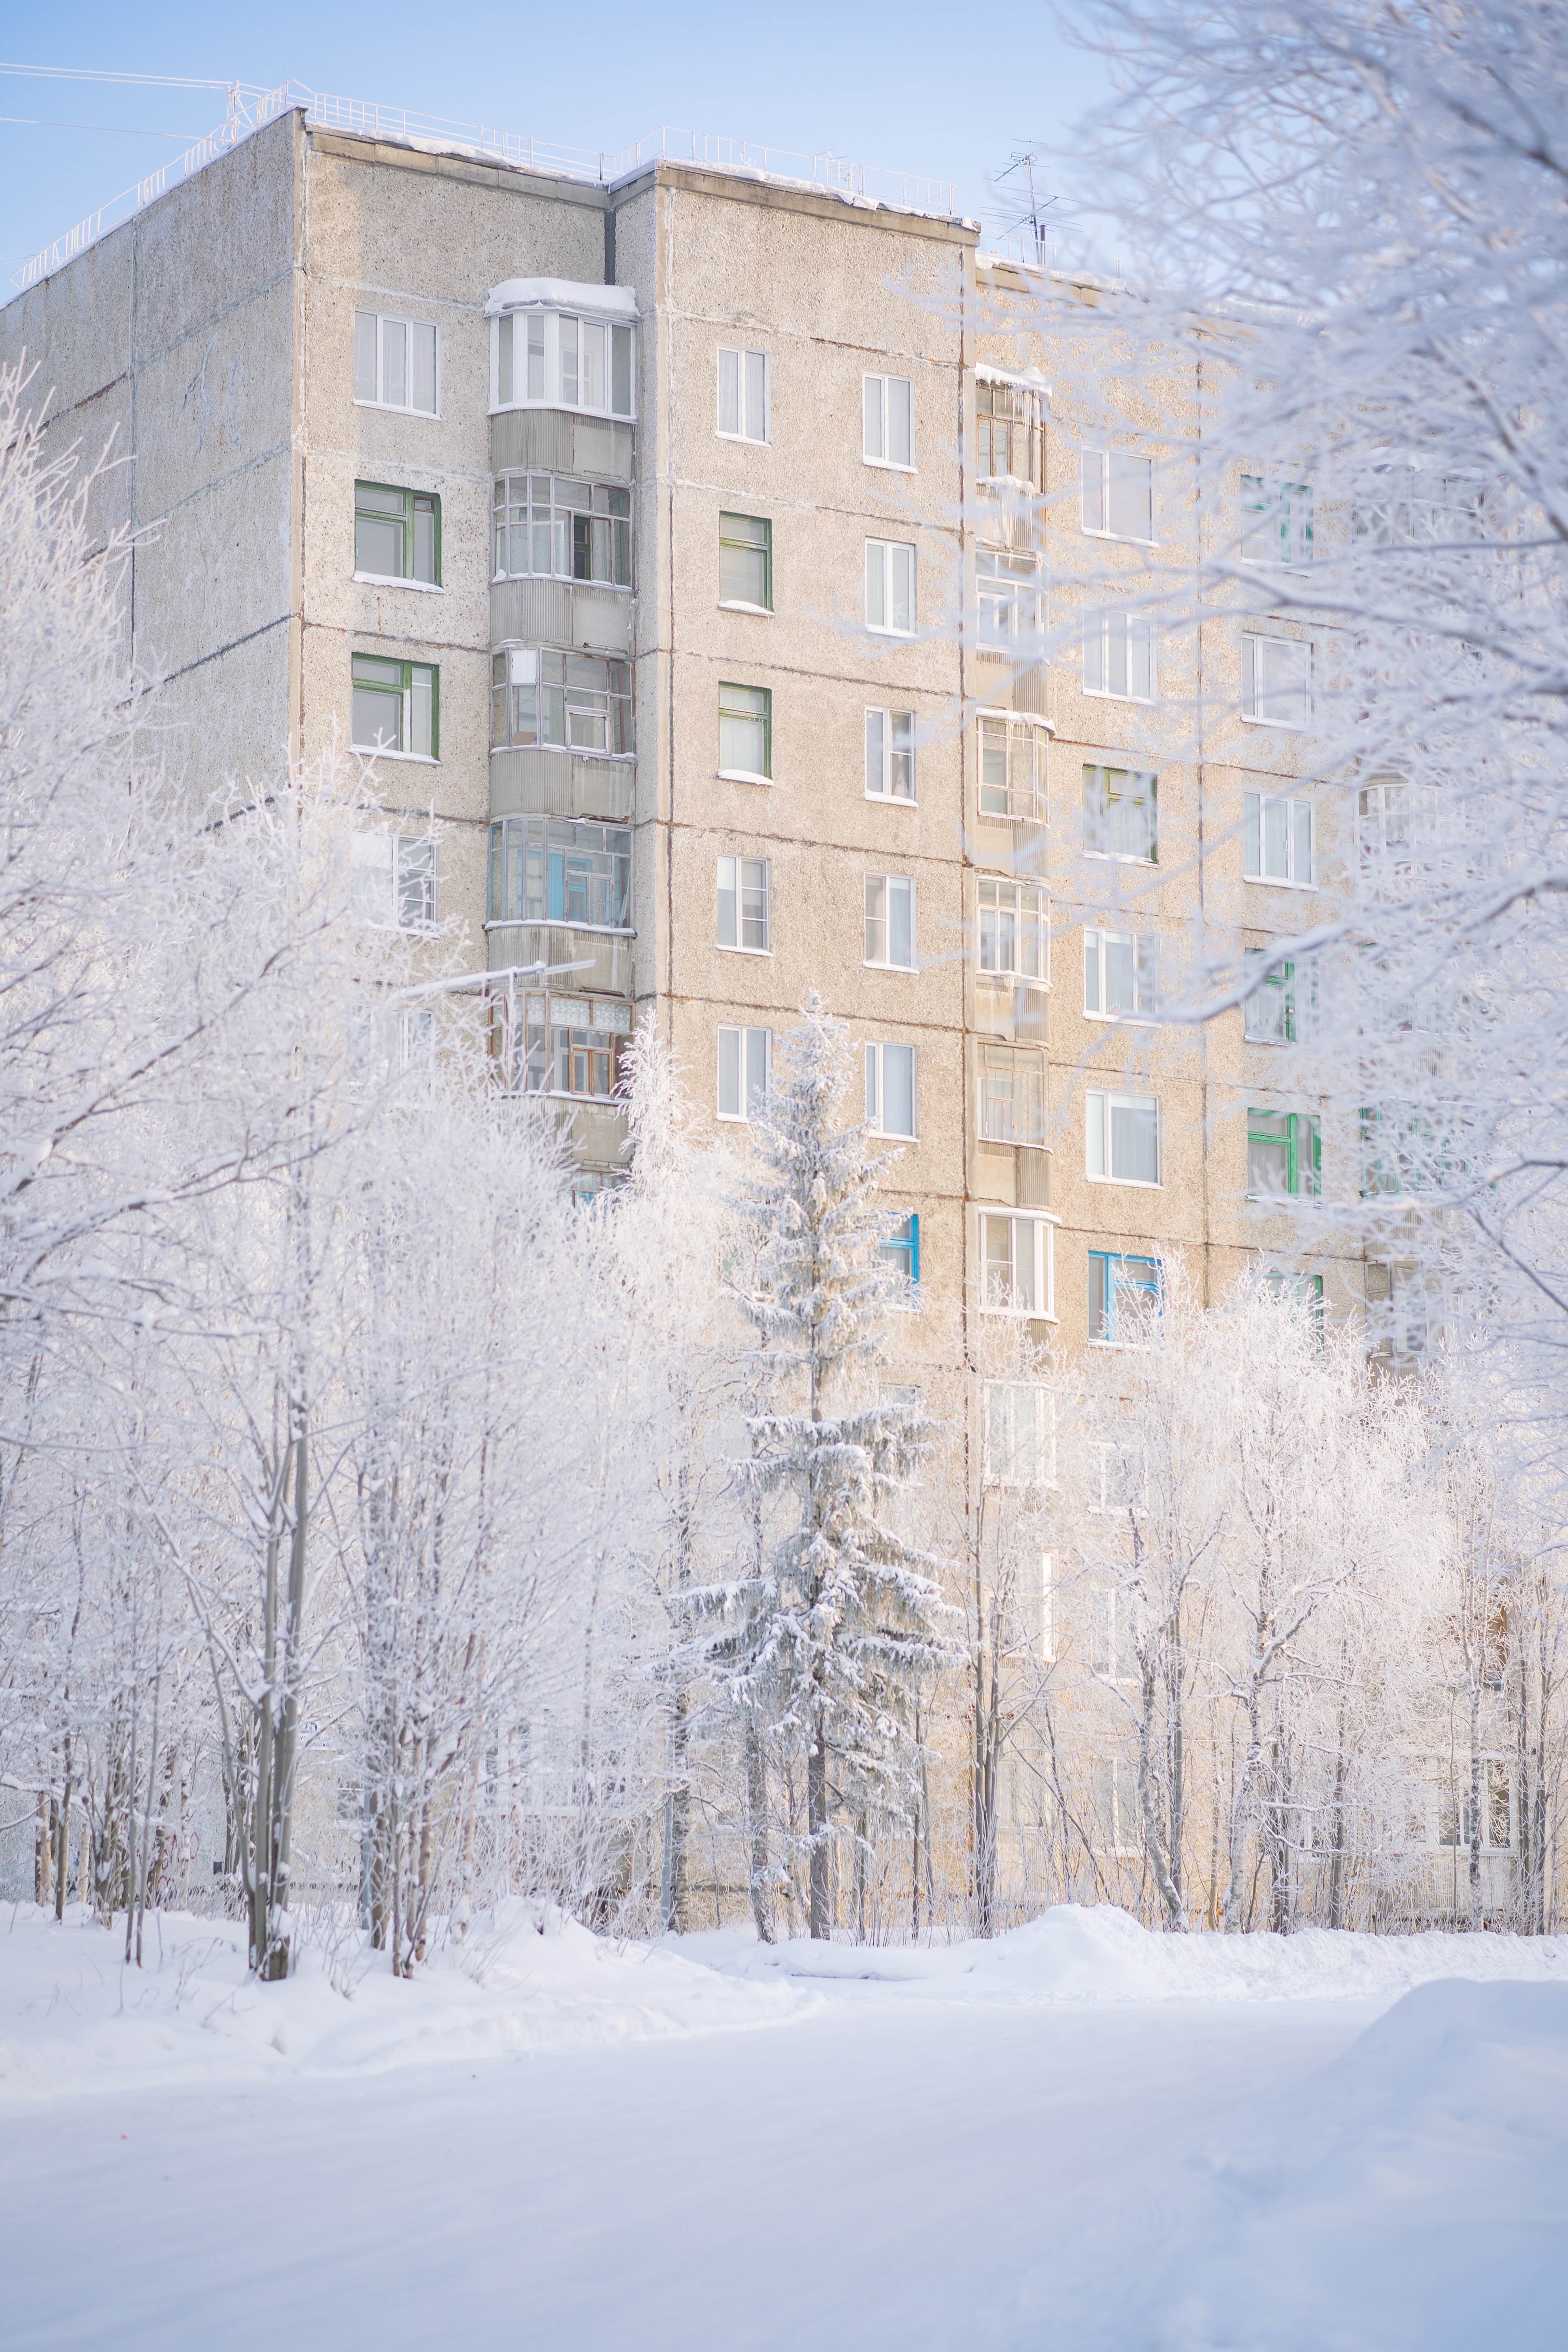 Snow Building Block Of Flats Brutalism Winter Portrait Display Trees Cold Frost 3873x5809